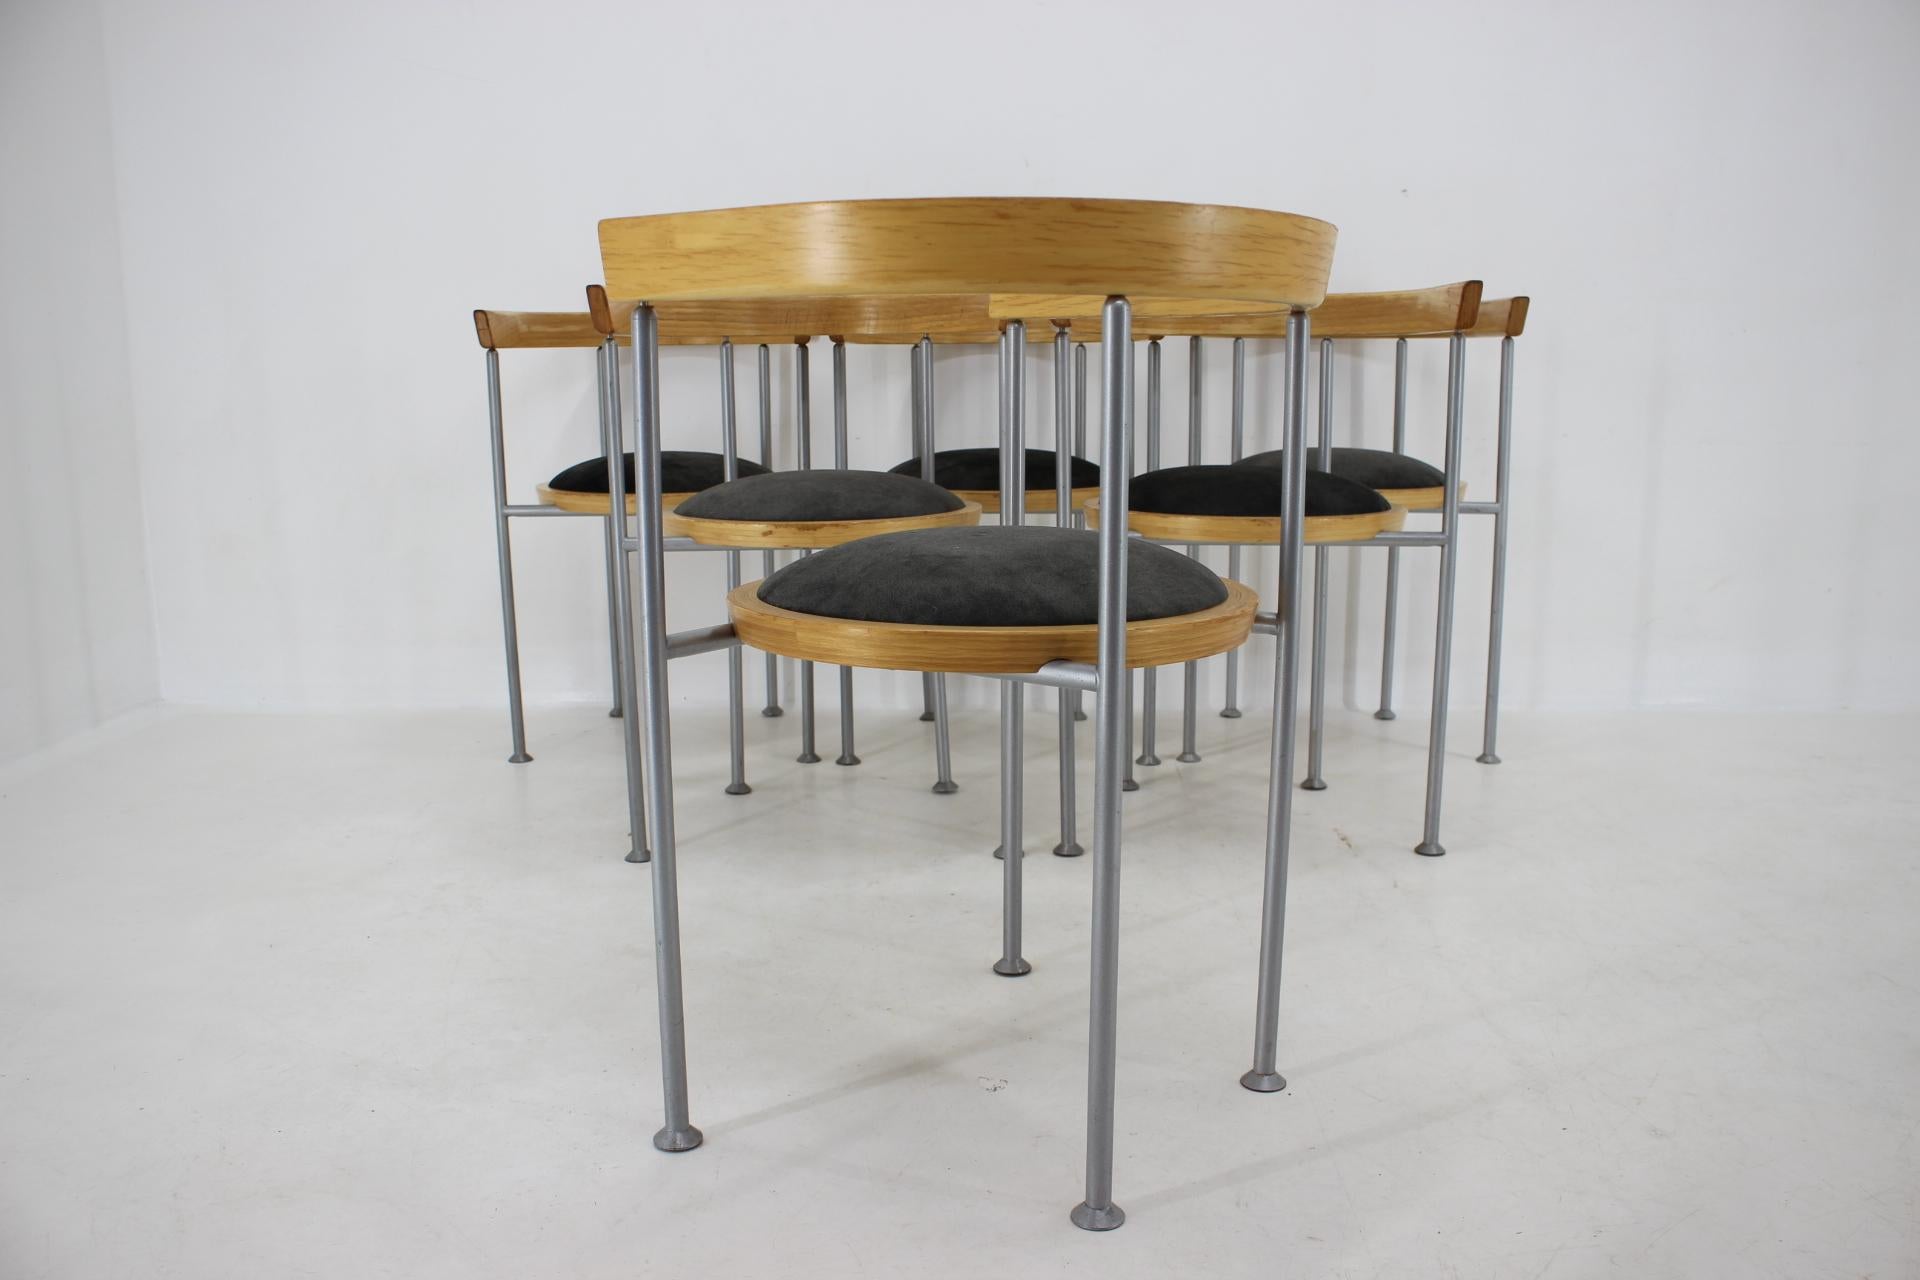 1990s Borge Lindau Set of 6 Dining Chairs for Bla Station, Sweden For Sale 1